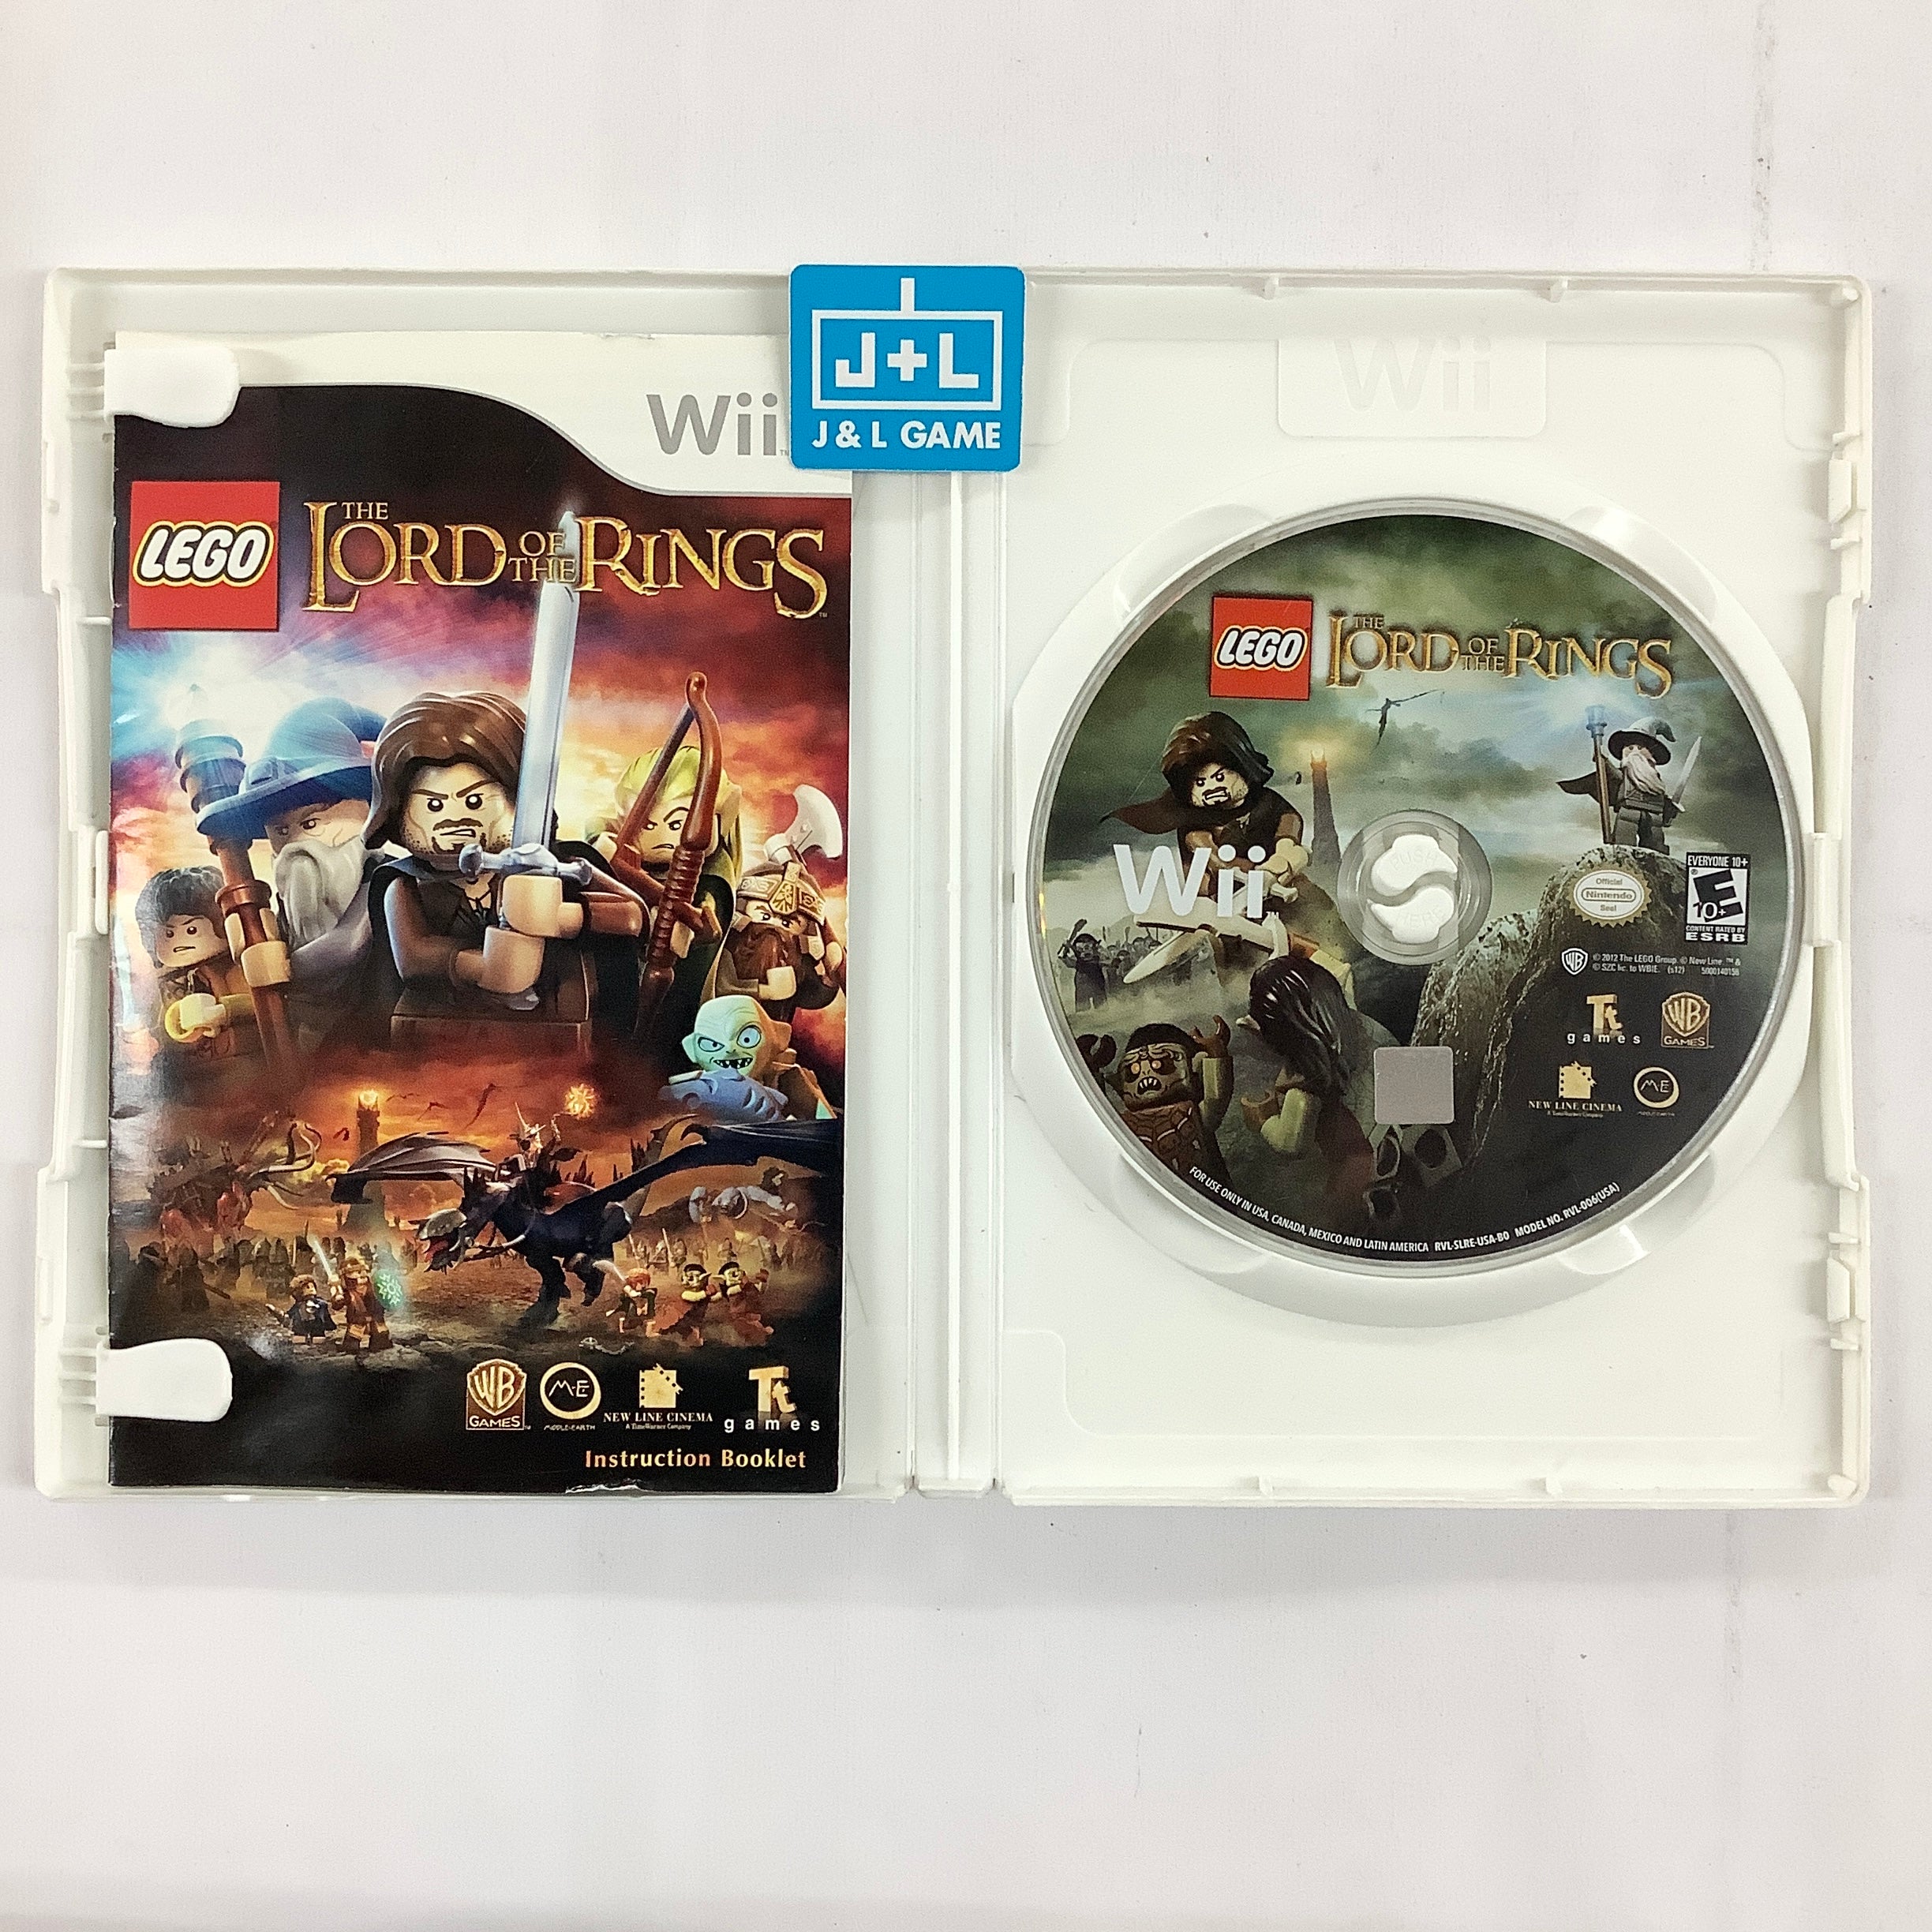 LEGO The Lord of the Rings - Nintendo Wii [Pre-Owned] Video Games Warner Bros. Interactive Entertainment   